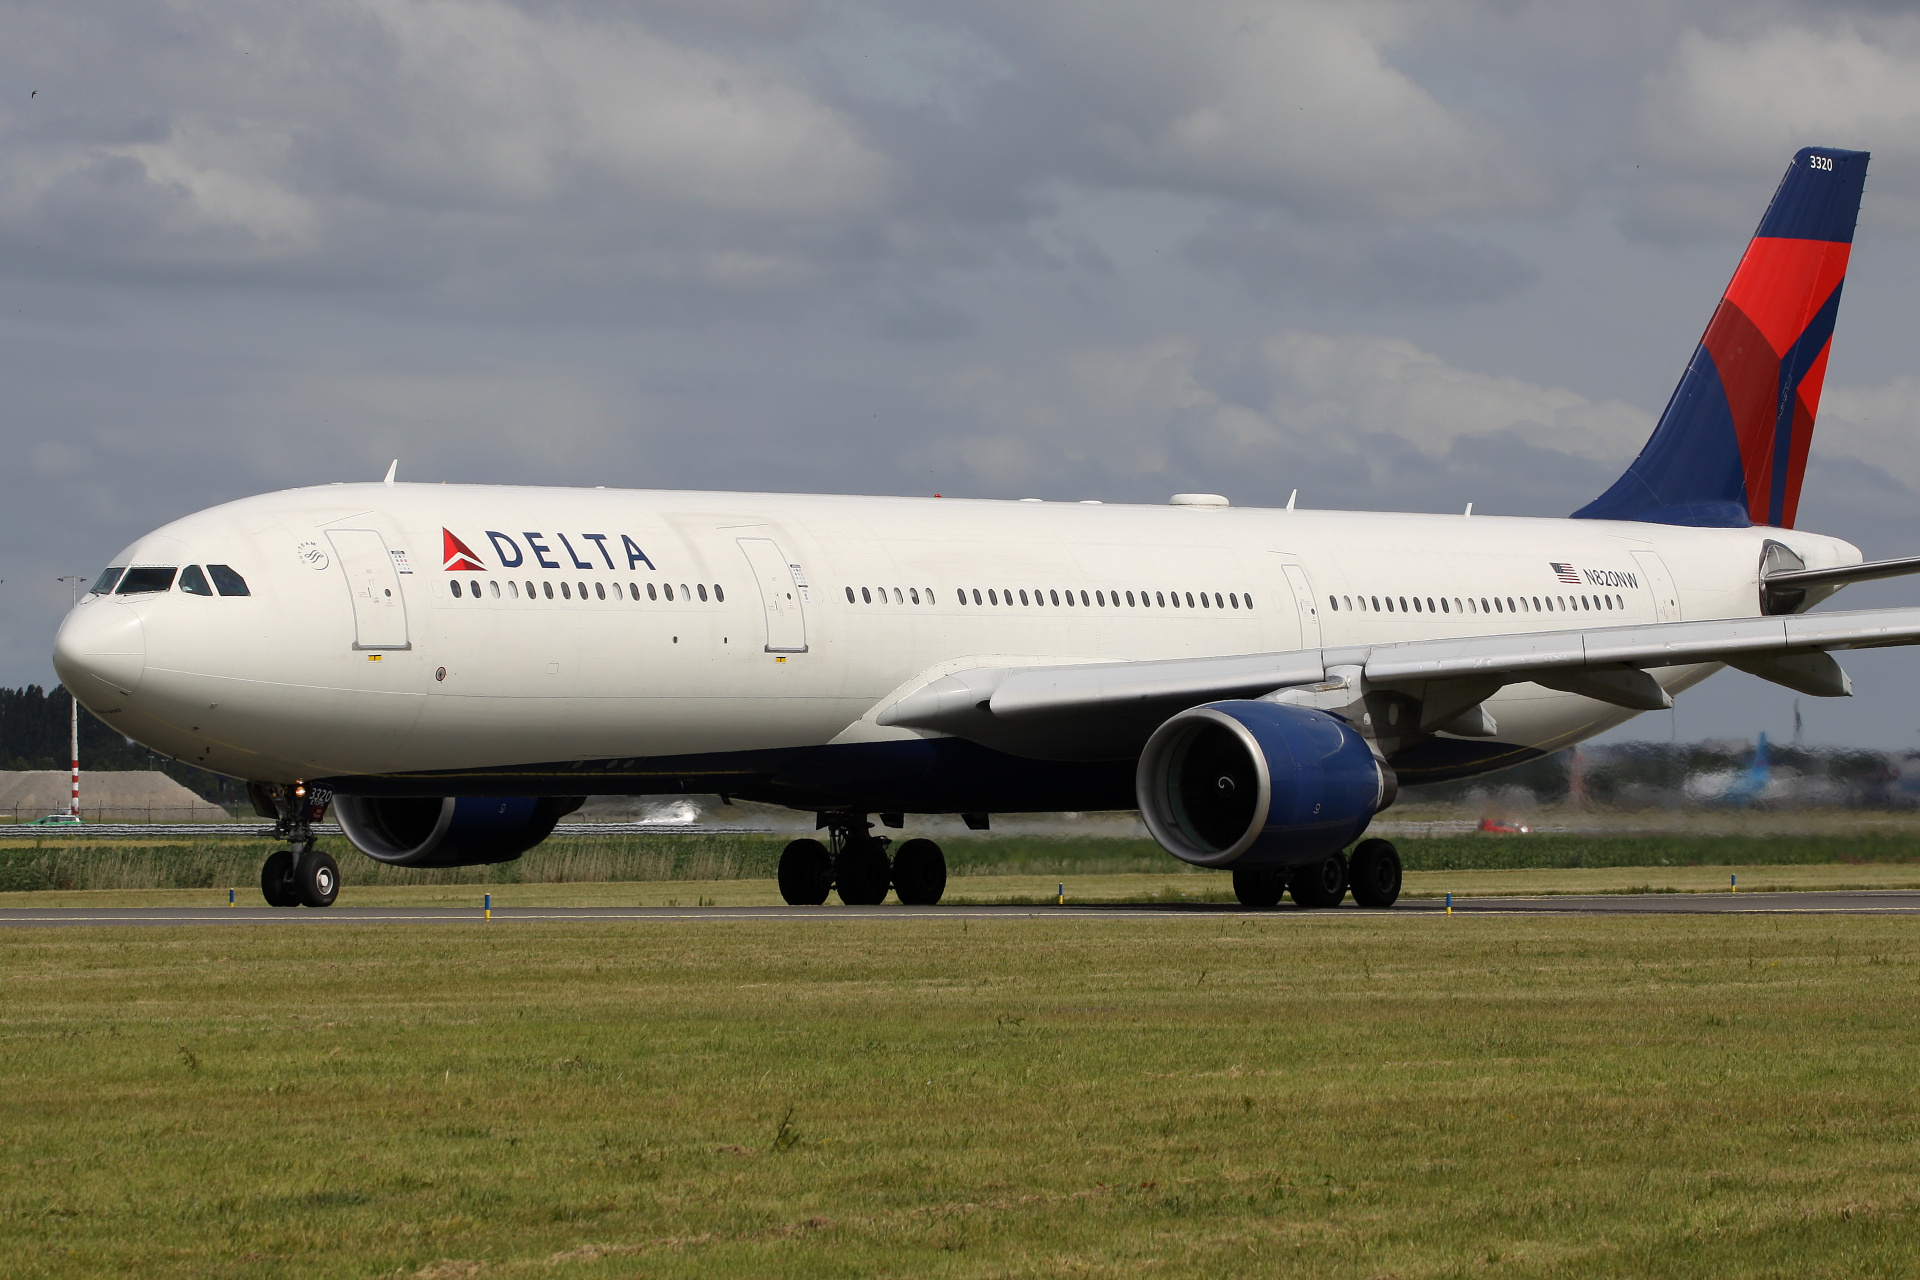 N820NW (Aircraft » Schiphol Spotting » Airbus A330-300 » Delta Airlines)